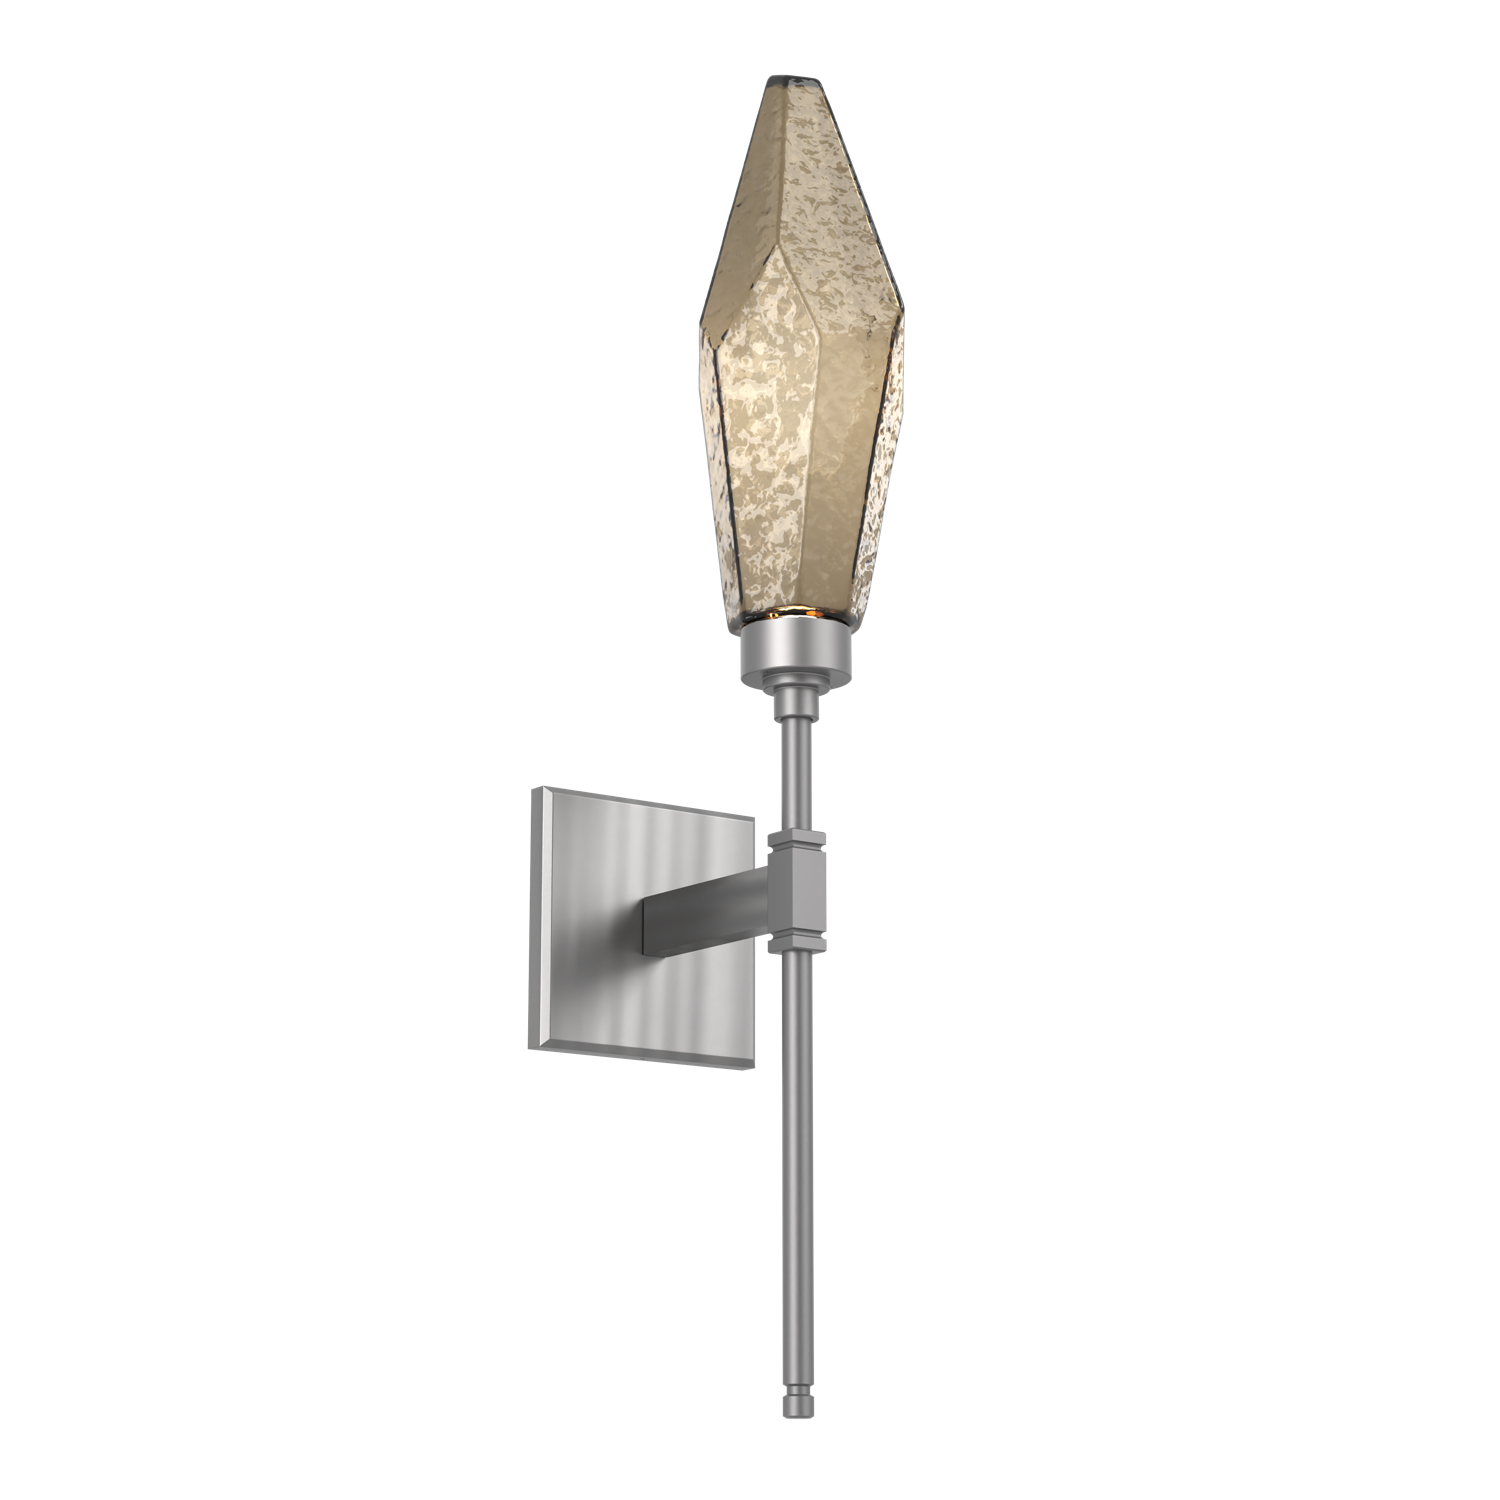 IDB0050-07-SN-CB-Hammerton-Studio-Rock-Crystal-belvedere-wall-sconce-with-satin-nickel-finish-and-chilled-bronze-blown-glass-shades-and-LED-lamping